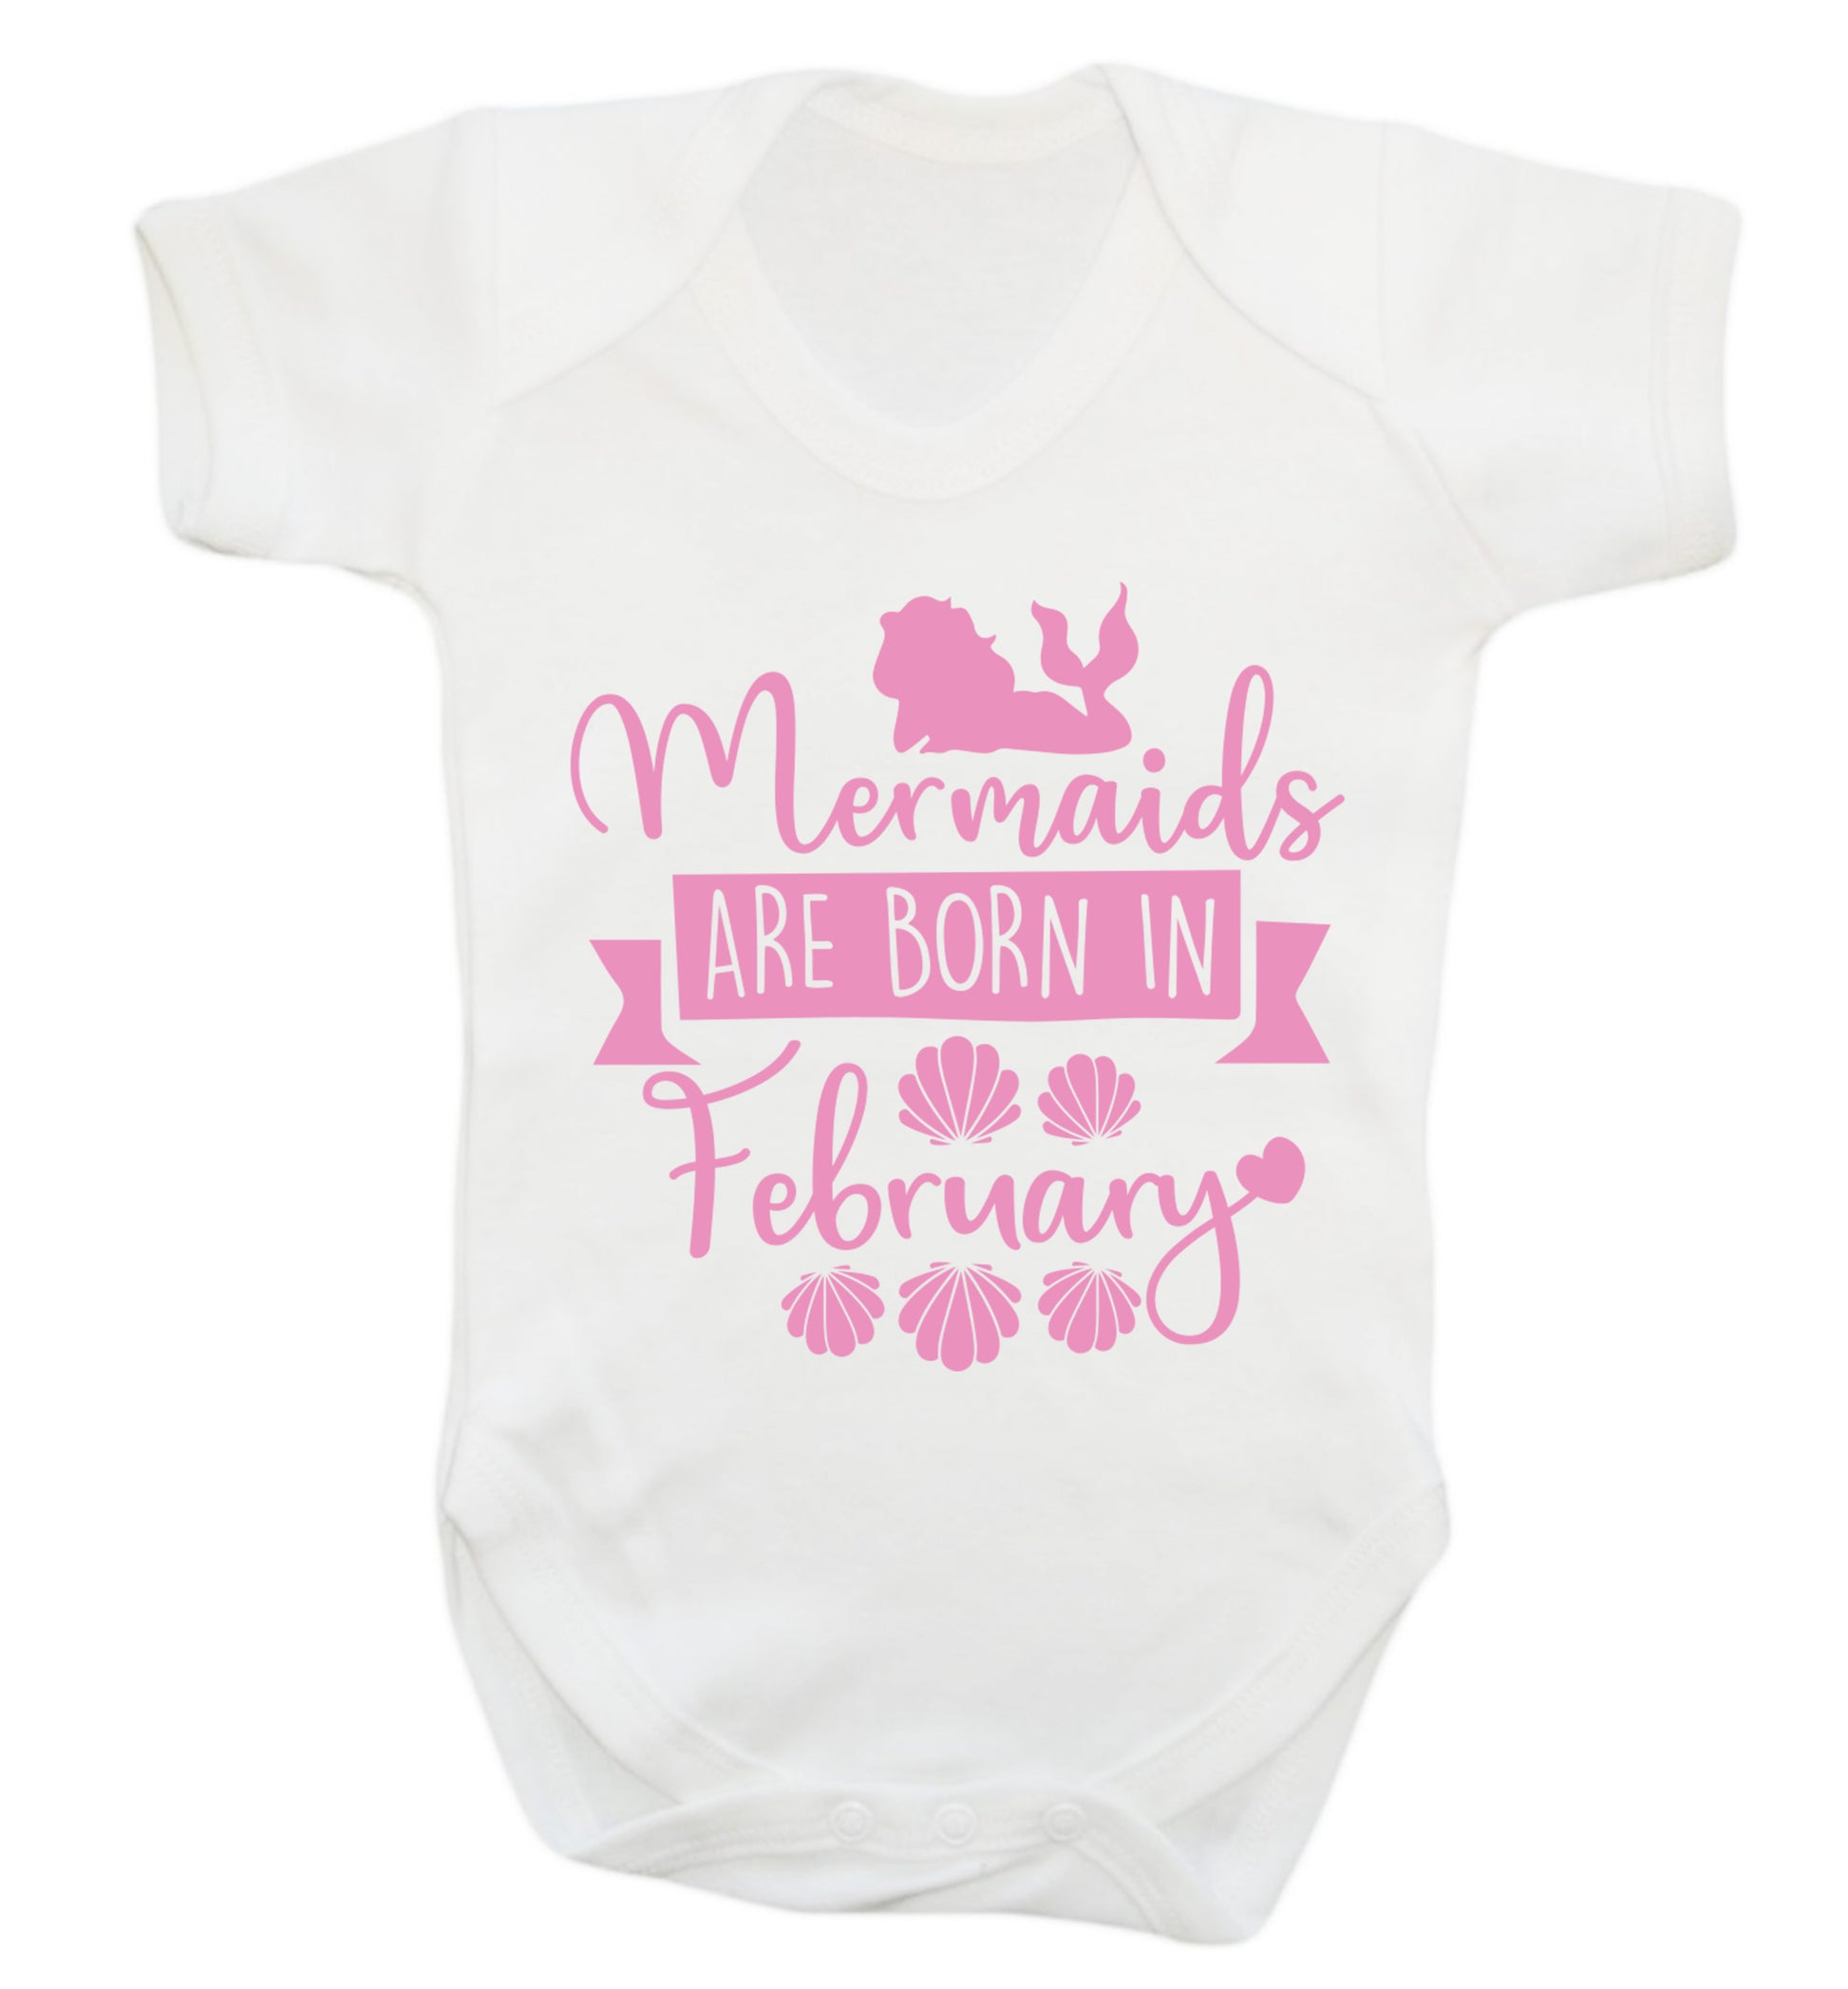 Mermaids are born in February Baby Vest white 18-24 months